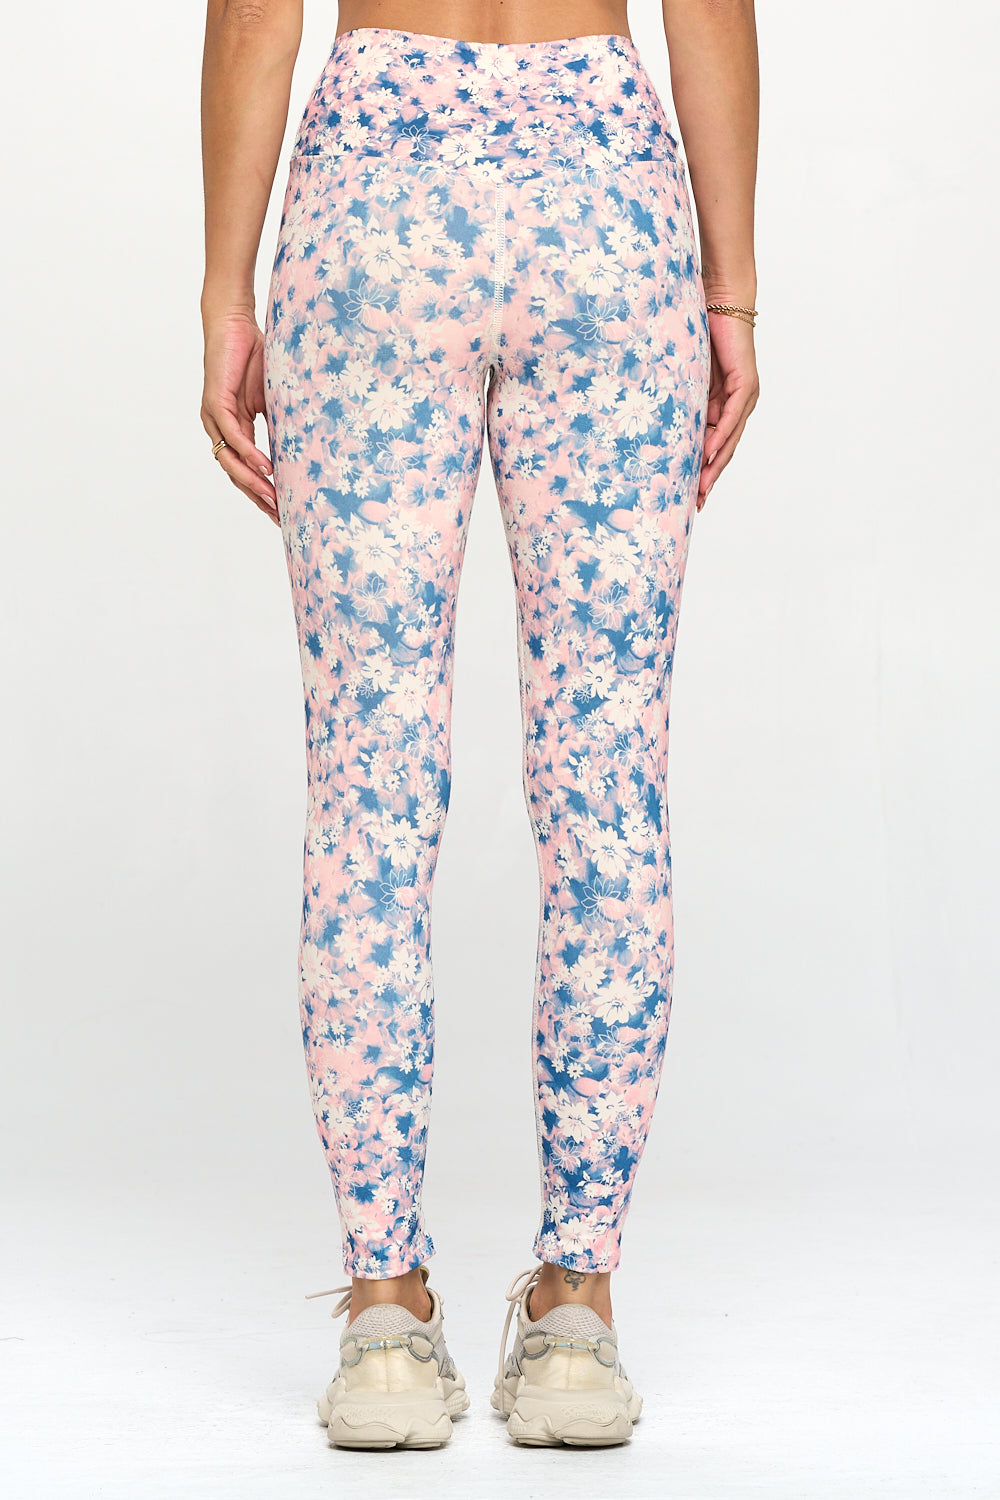 Tate - Cotton Candy Floral Garden Crossover Full-Length Legging (High-Waist)